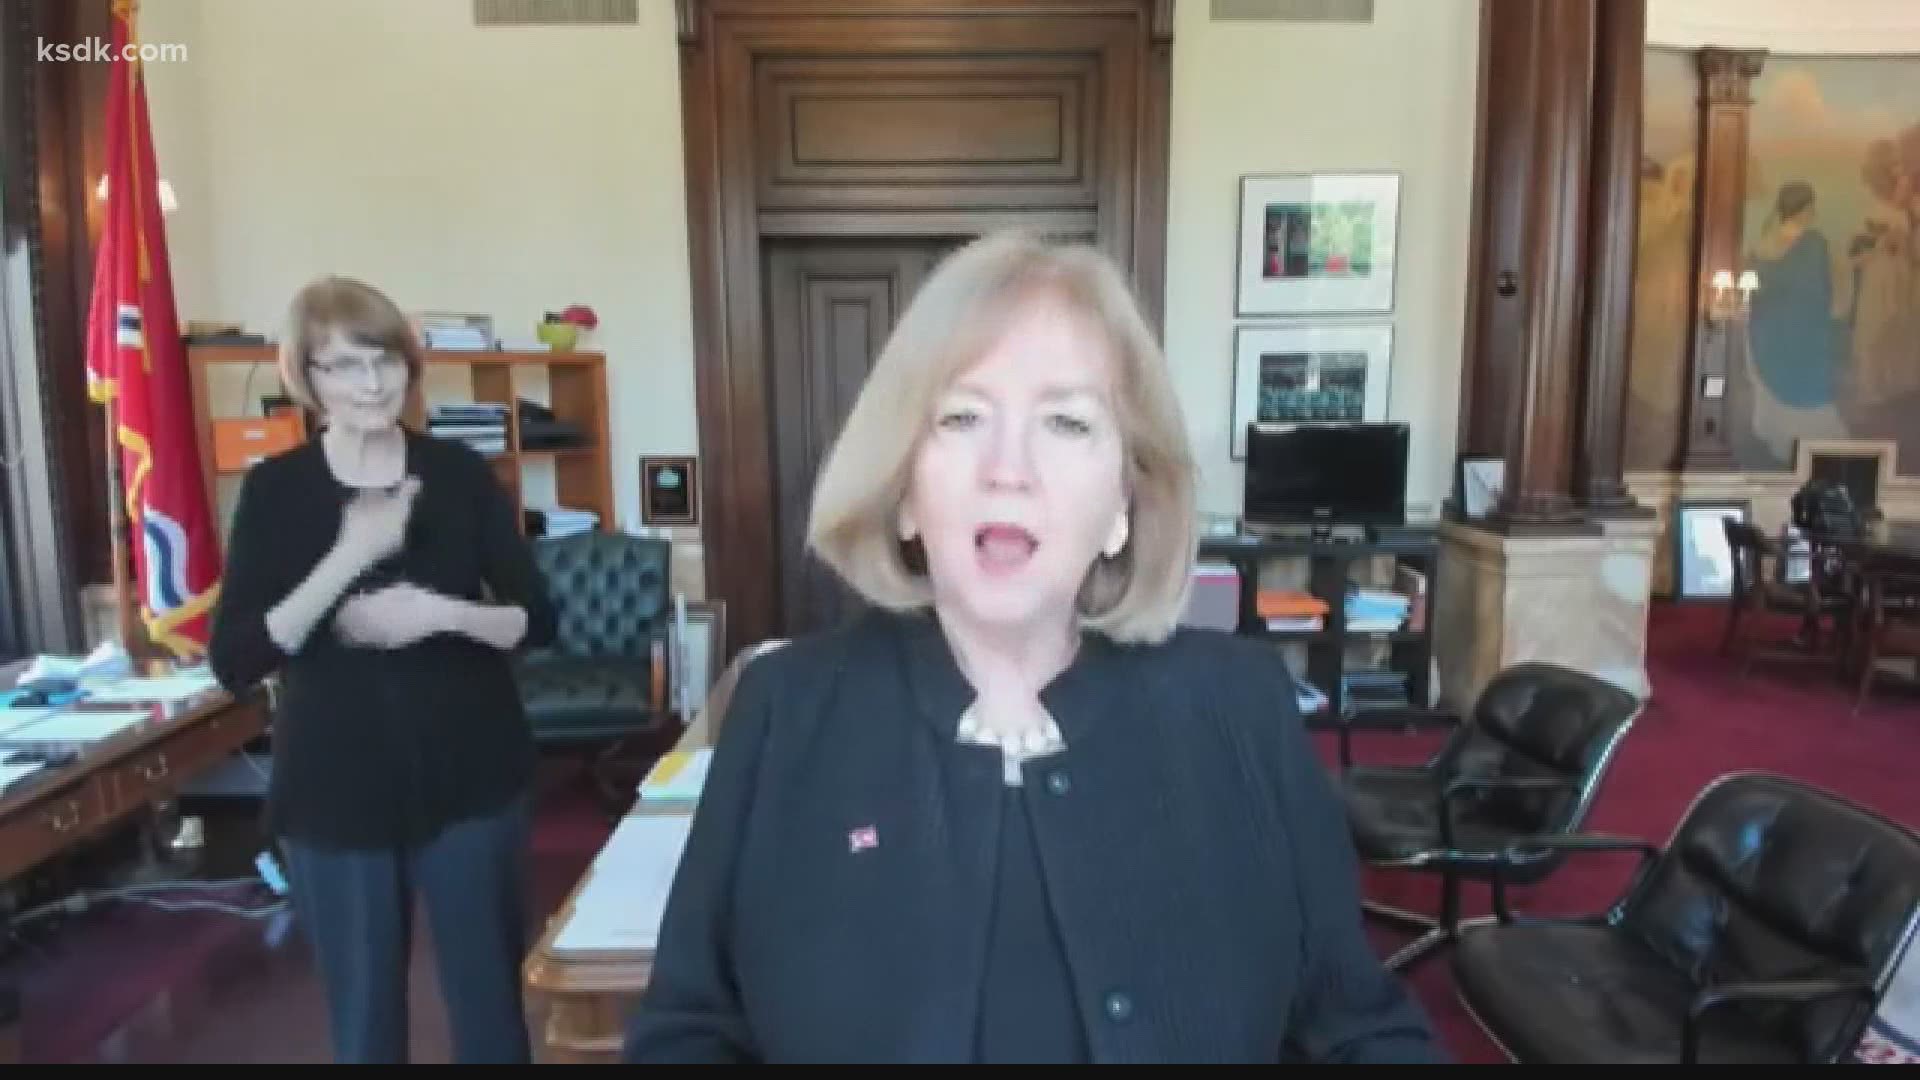 In the now-deleted Facebook video, Mayor Lyda Krewson read the first and last names of protesters who are calling on the city to defund the police department